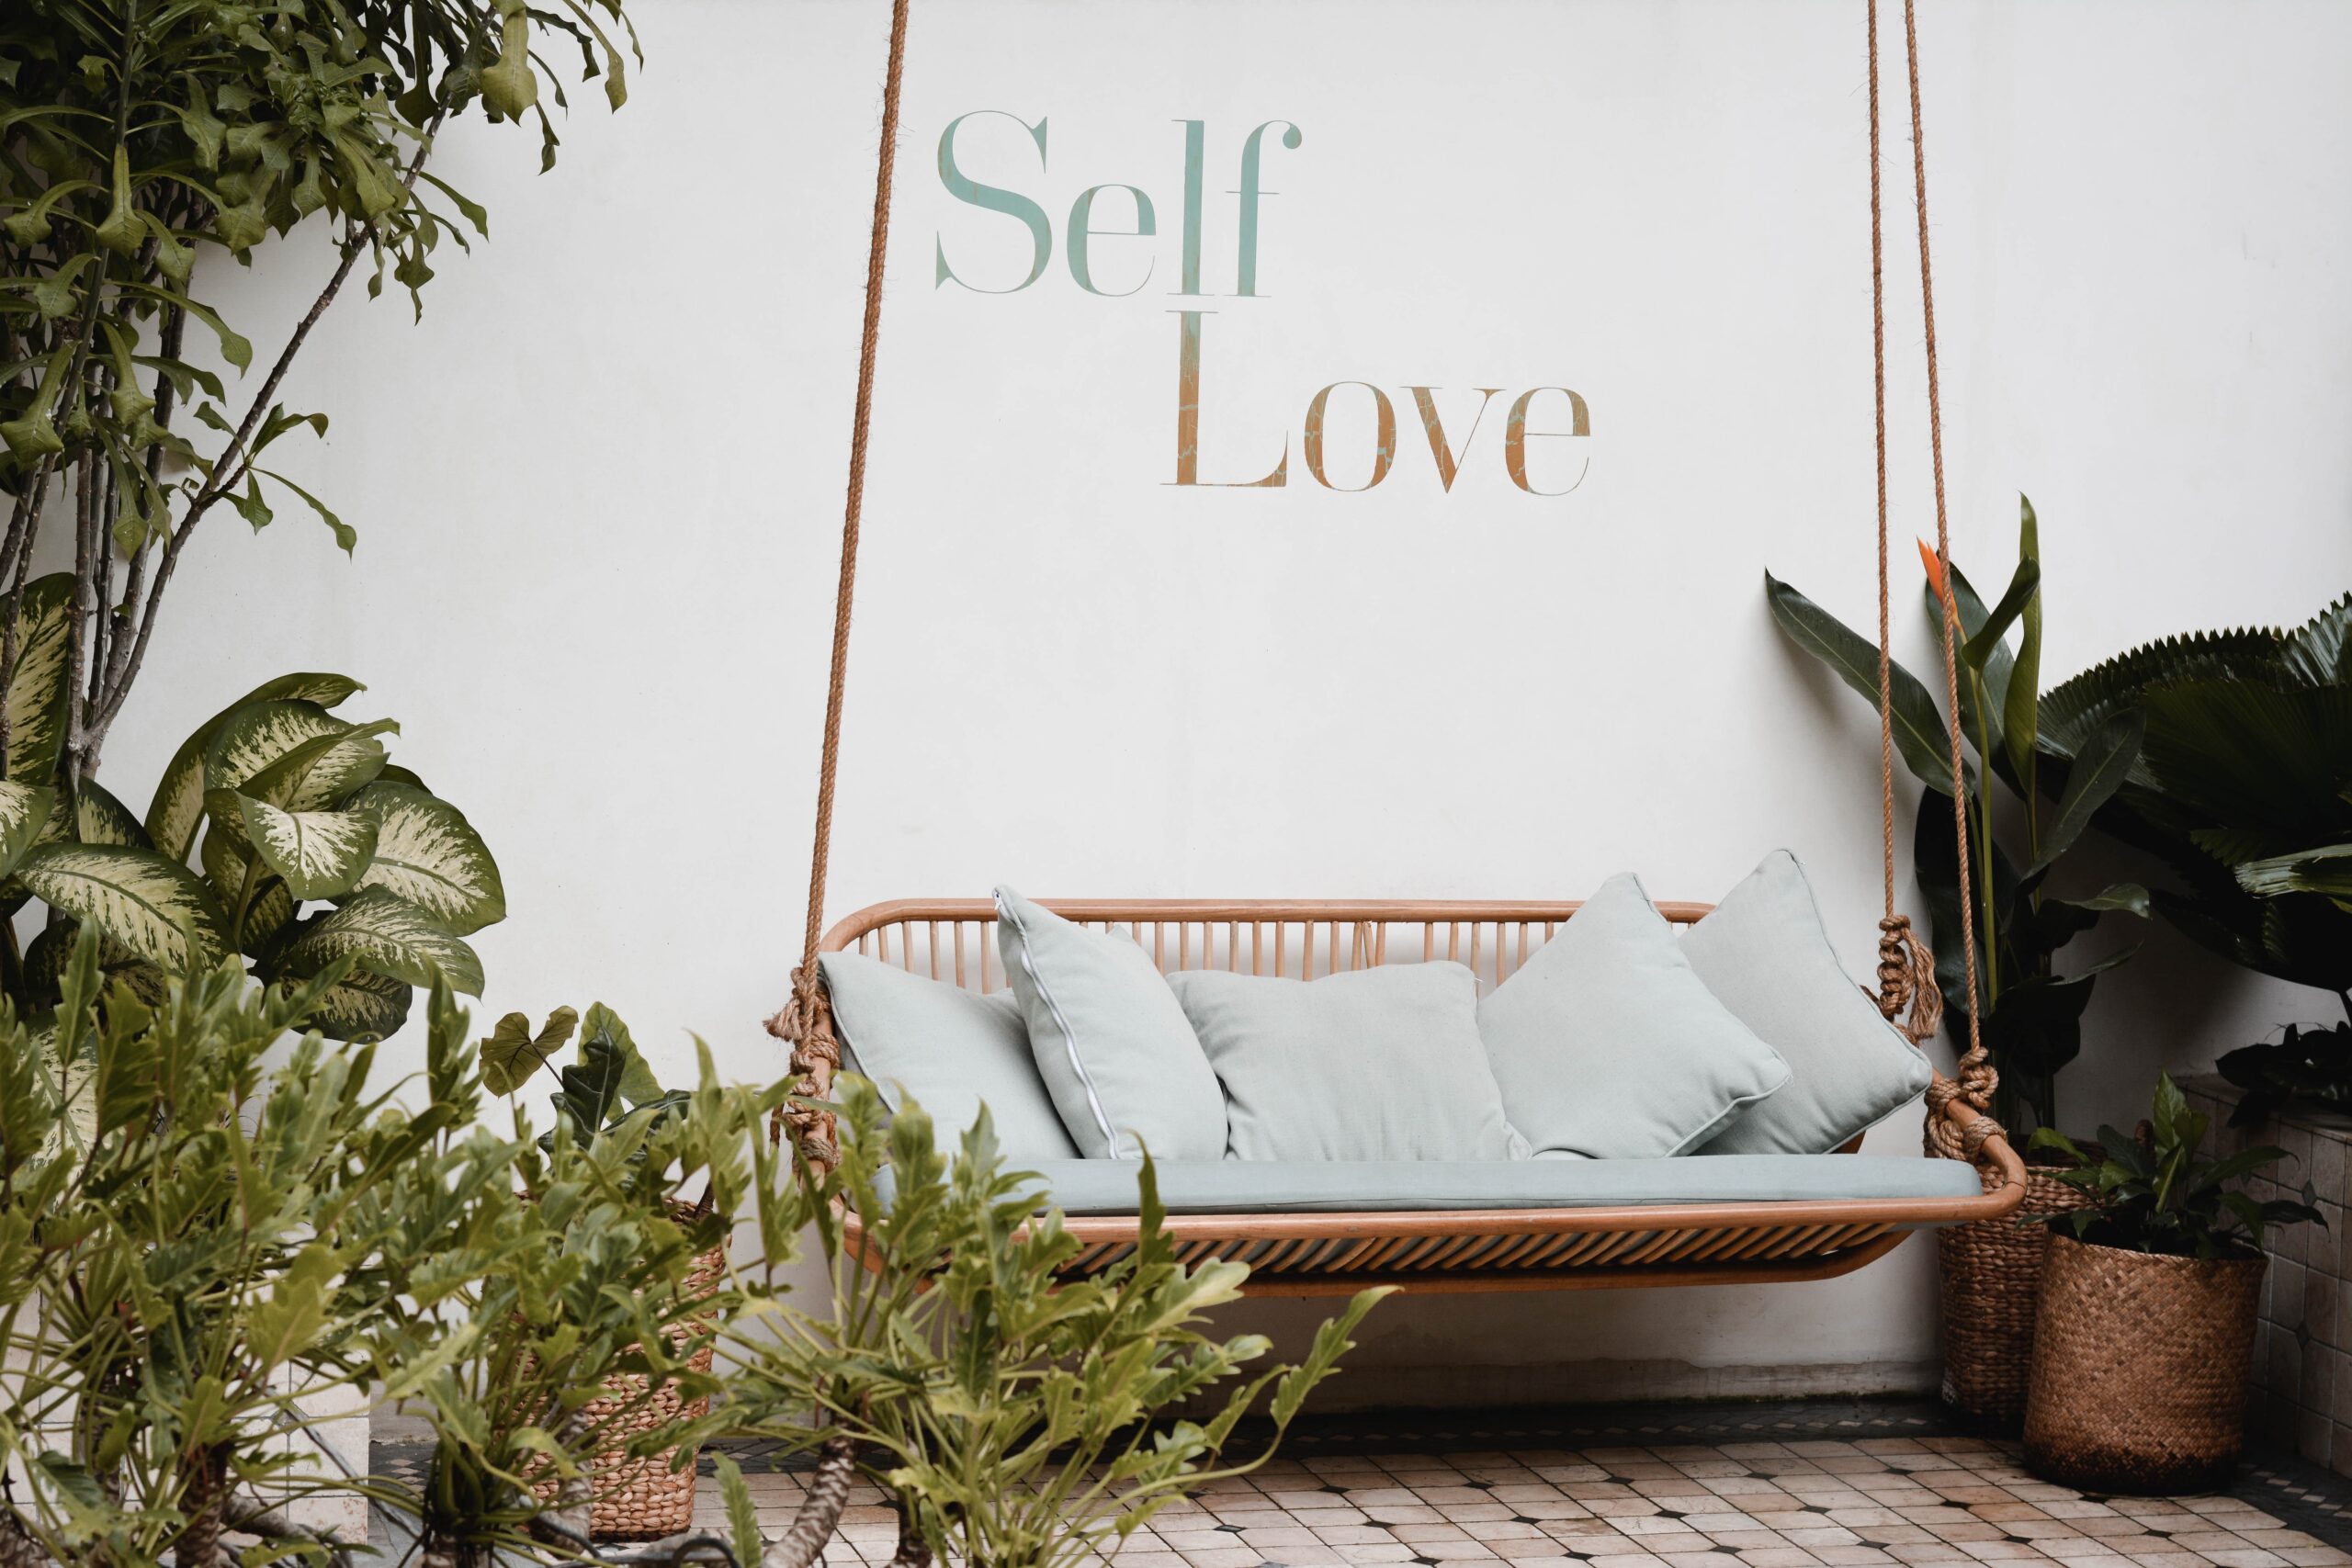 How Self-Care Benefits Both Your Body and Intimacy